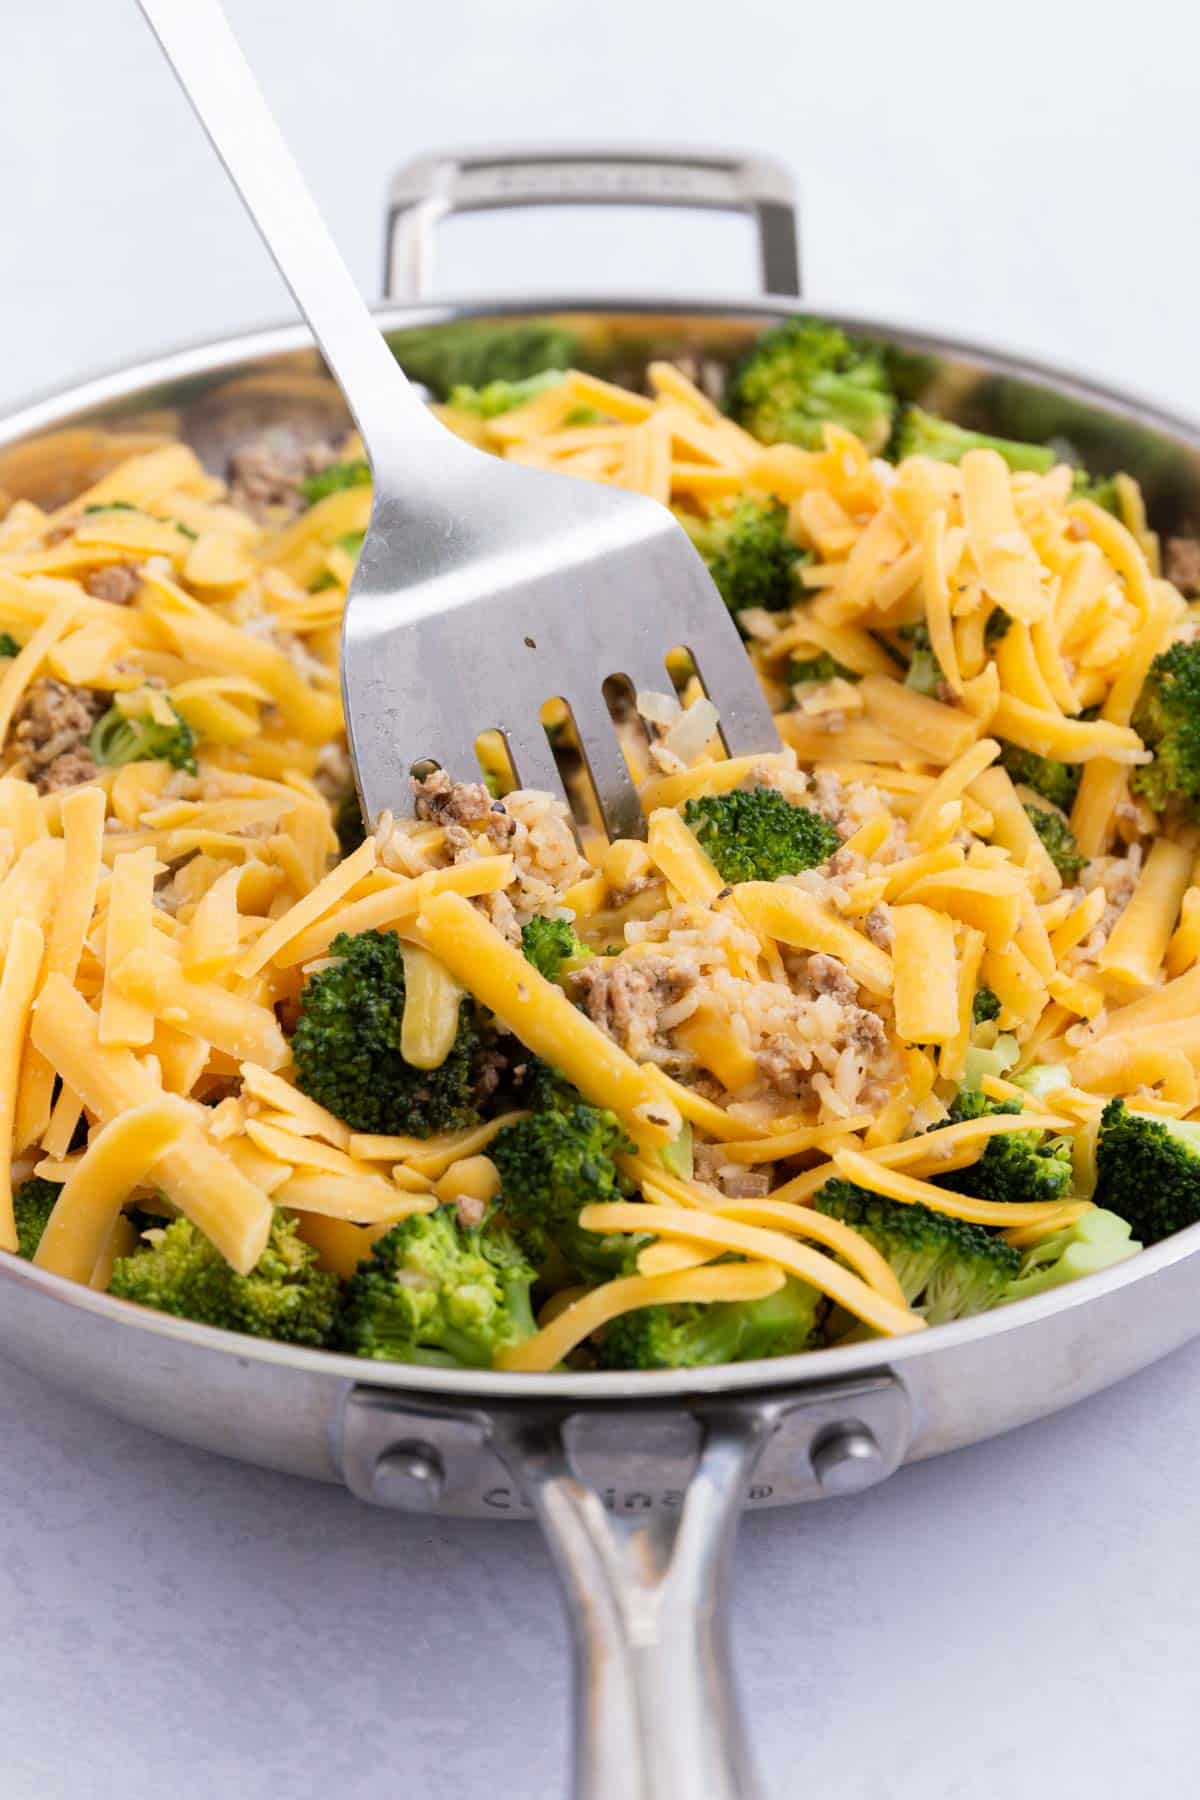 Cheddar cheese is stirred into the broccoli-rice mixture.